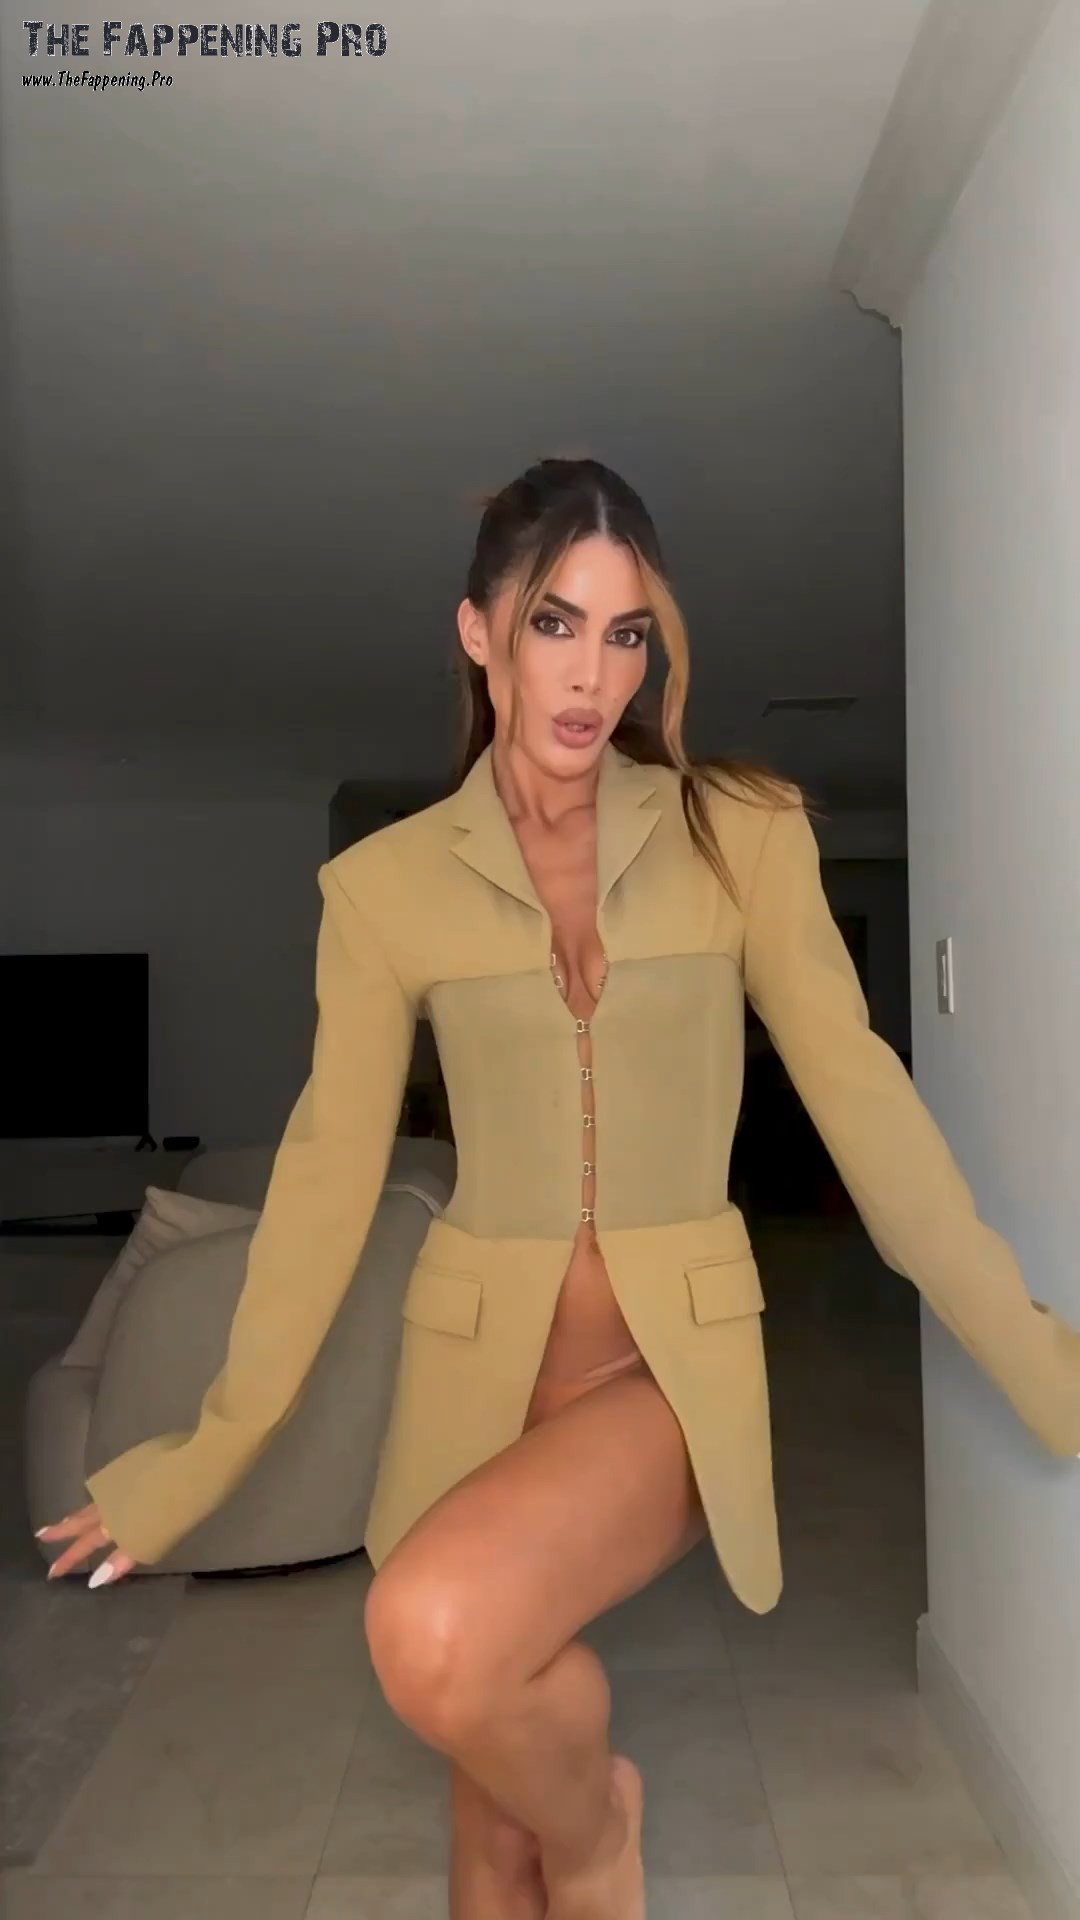 Join Brazilian supermodel Camila Coelho as she turns heads at a concert with her daring outfit choice. With a long jacket worn without a bra and a chain-like skirt, Camila leaves little to the imagination in her provocative ensemble. See her jaw-dropping look and behind-the-scenes fitting video on her latest adventure!